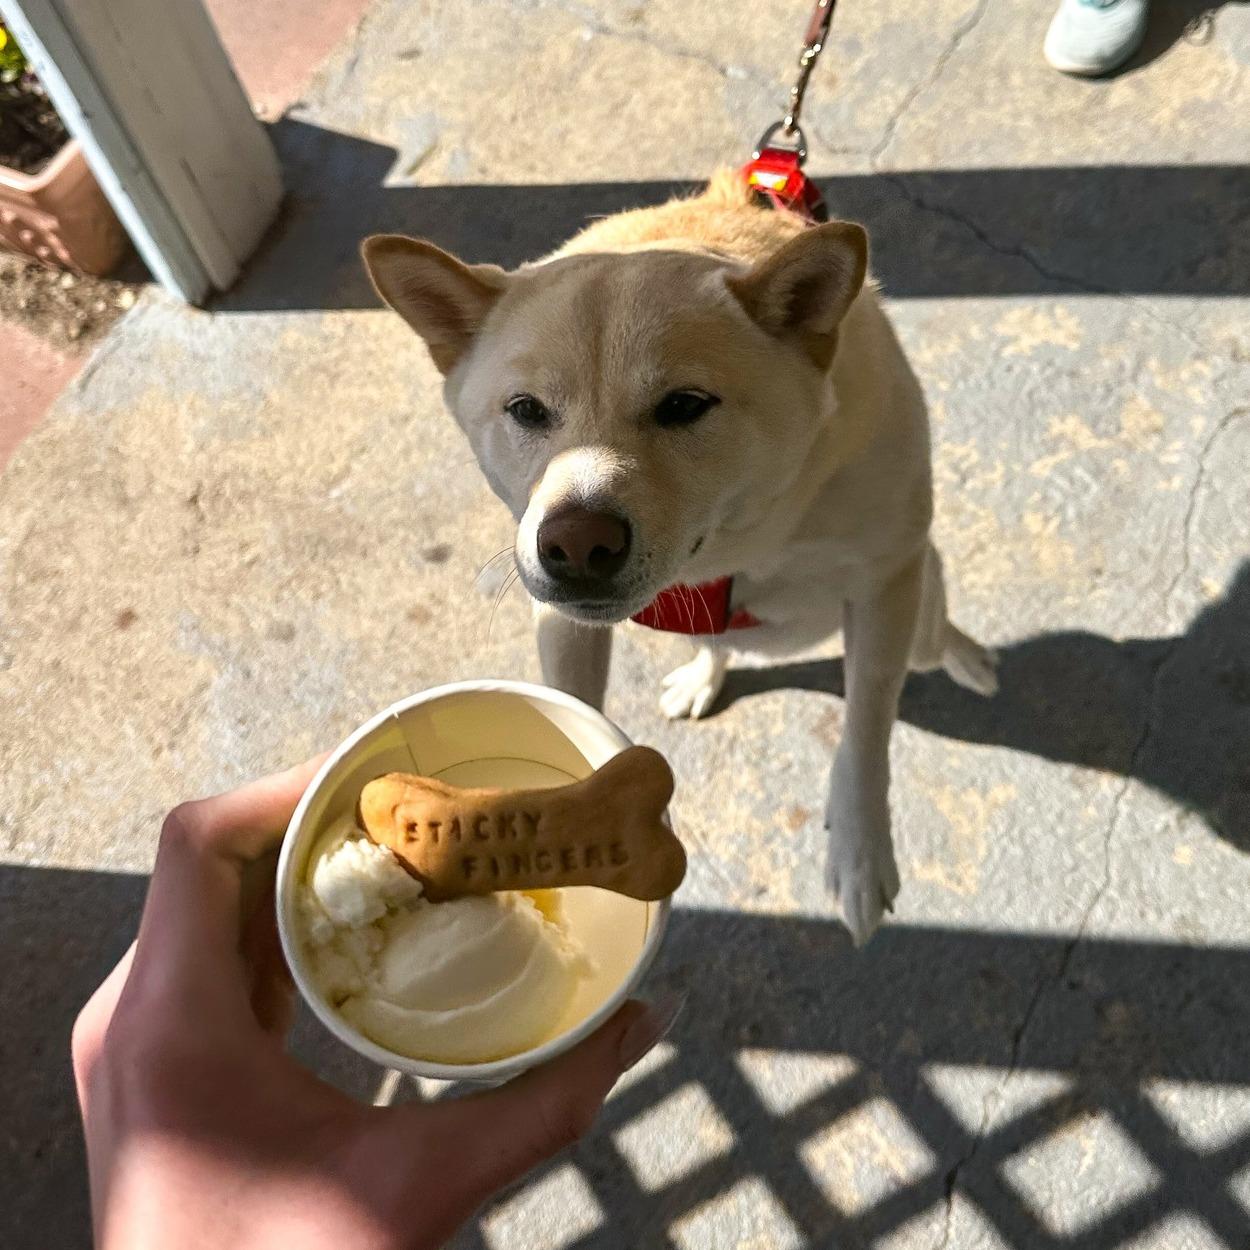 Pet Friendly Sticky Fingers Ice Cream Parlor